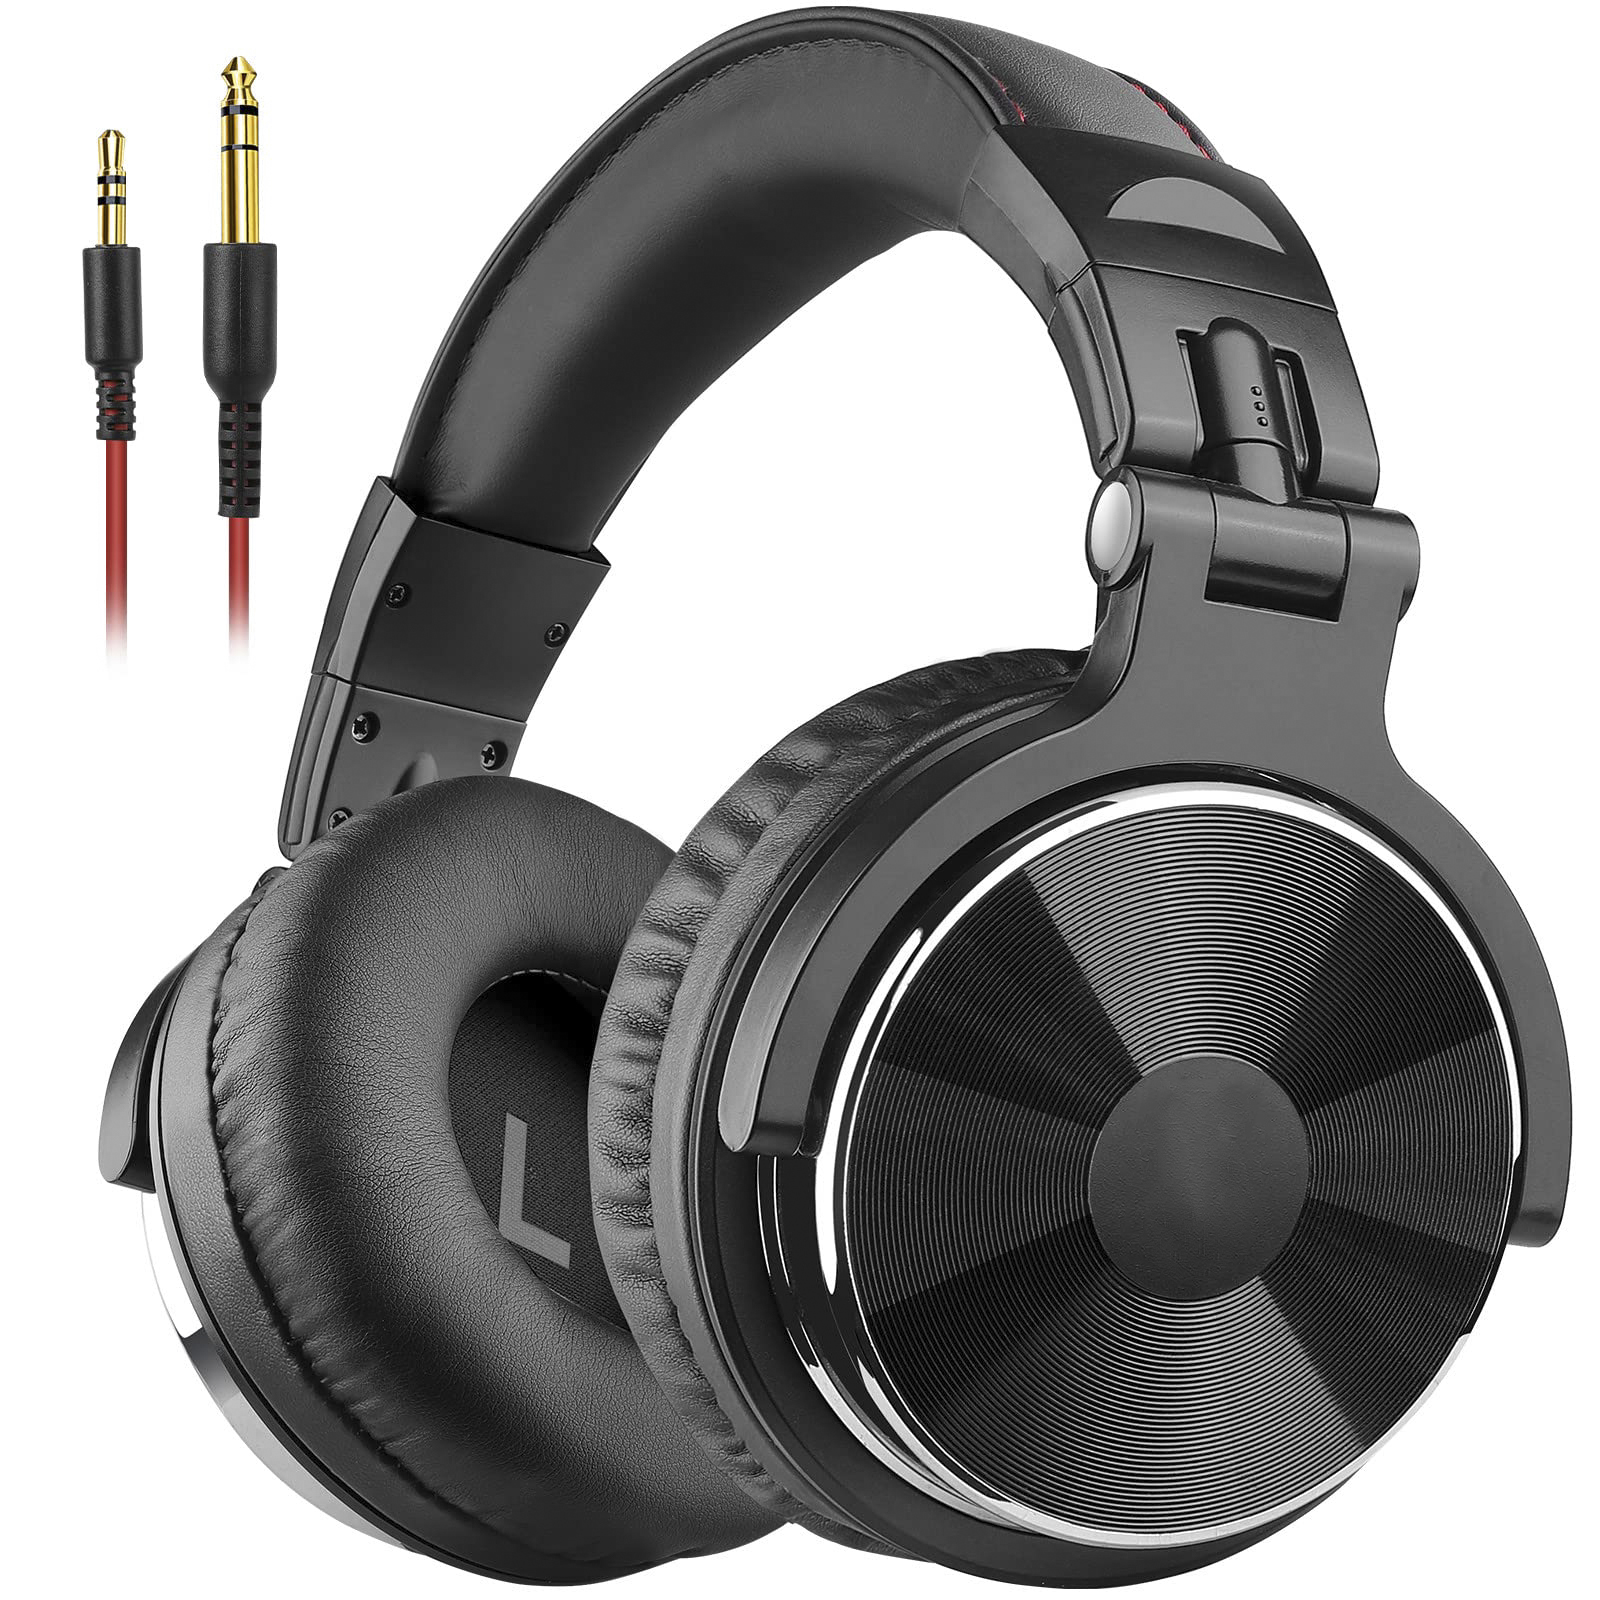 Wired Over Ear Headphones Studio Monitor & Mixing DJ Stereo Headsets with 50mm Neodymium Drivers and 1/4 to 3.5mm Jack for AMP Computer Recording Podcast Keyboard Guitar Laptop - Black-OXIMETERBUY